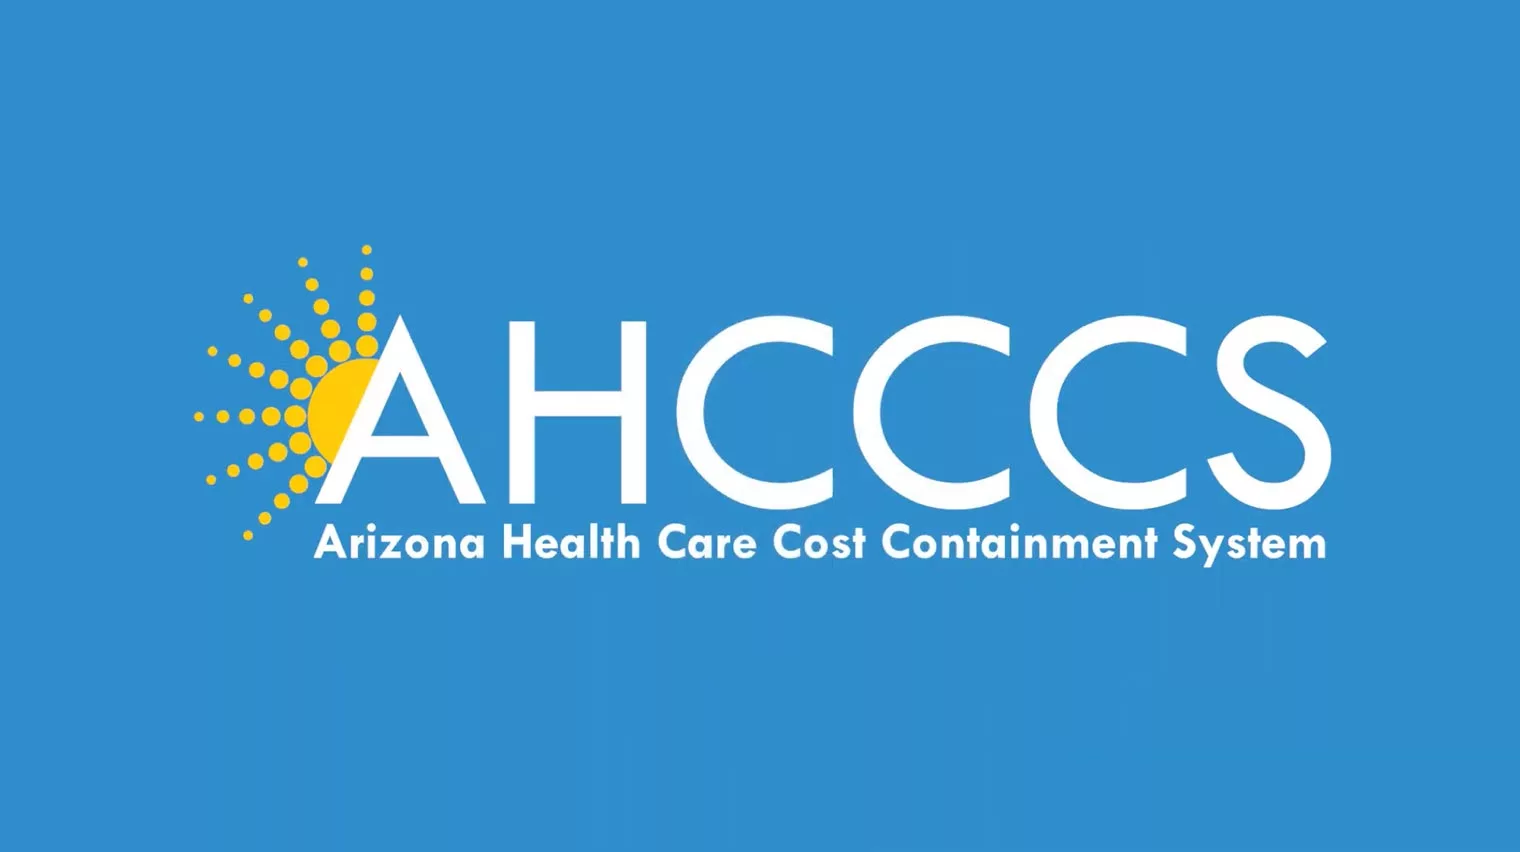 AHCCCS covers rehab services for substance abuse, mental health, and physical therapy.